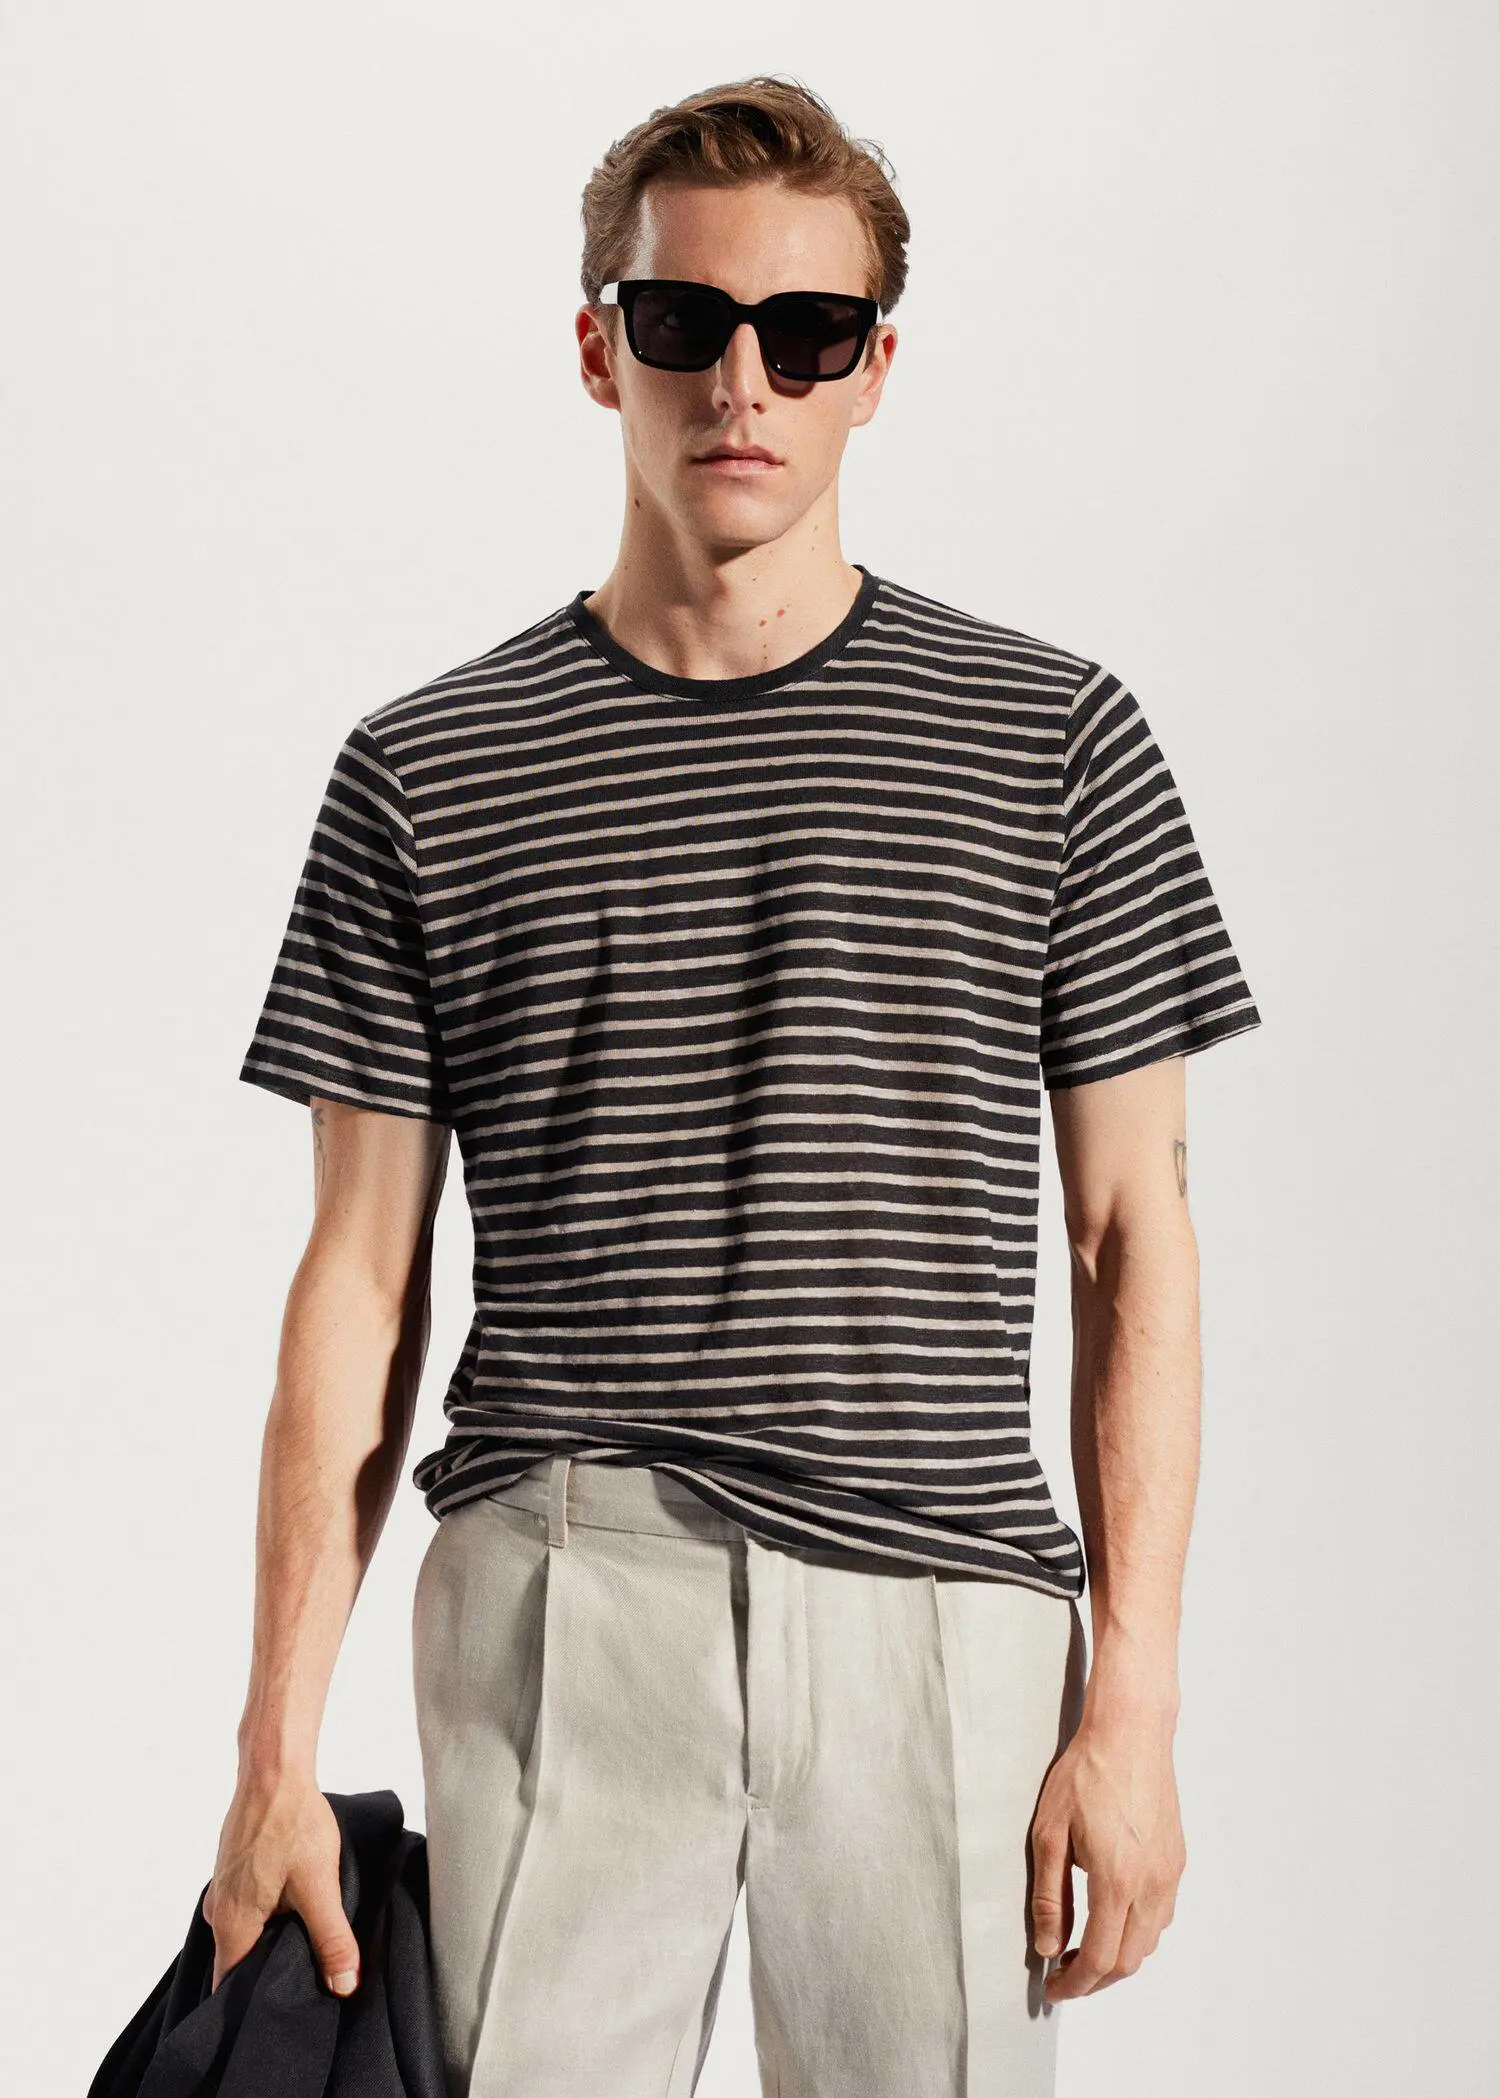 Mango 100% linen striped t-shirt. a man wearing sunglasses and a black and white striped shirt. 